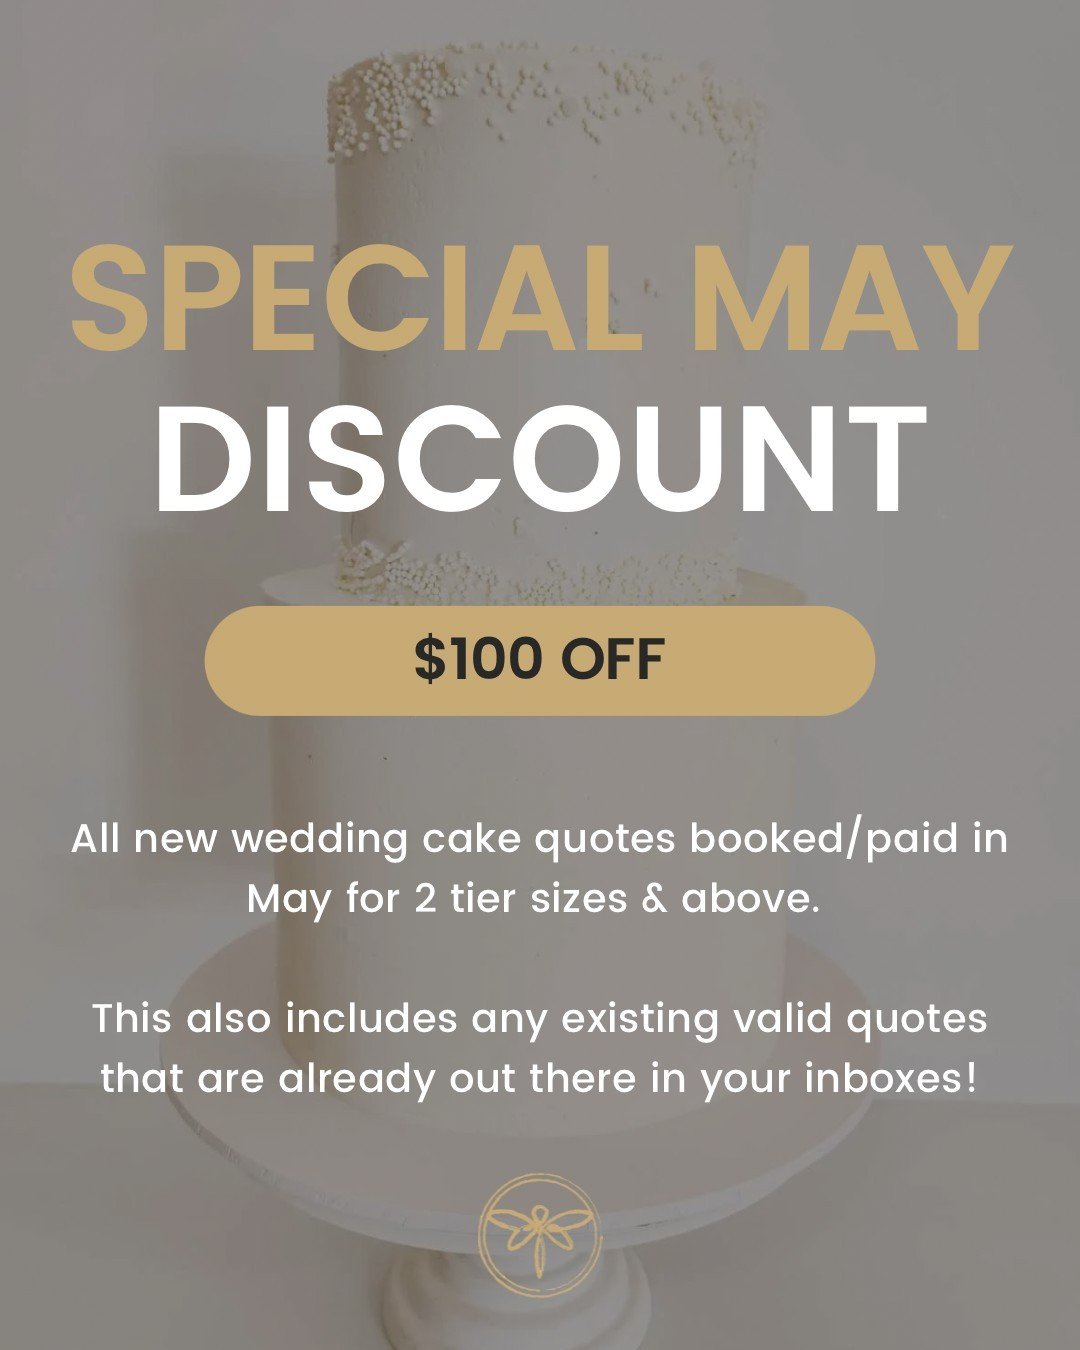 🍰All new wedding cake quotes booked/paid in May for 2 tier sizes &amp; above will have a $100 discount on them, this includes any existing valid/in-date quotes that are already out there in your inboxes. 💌

This is something I've never done before 